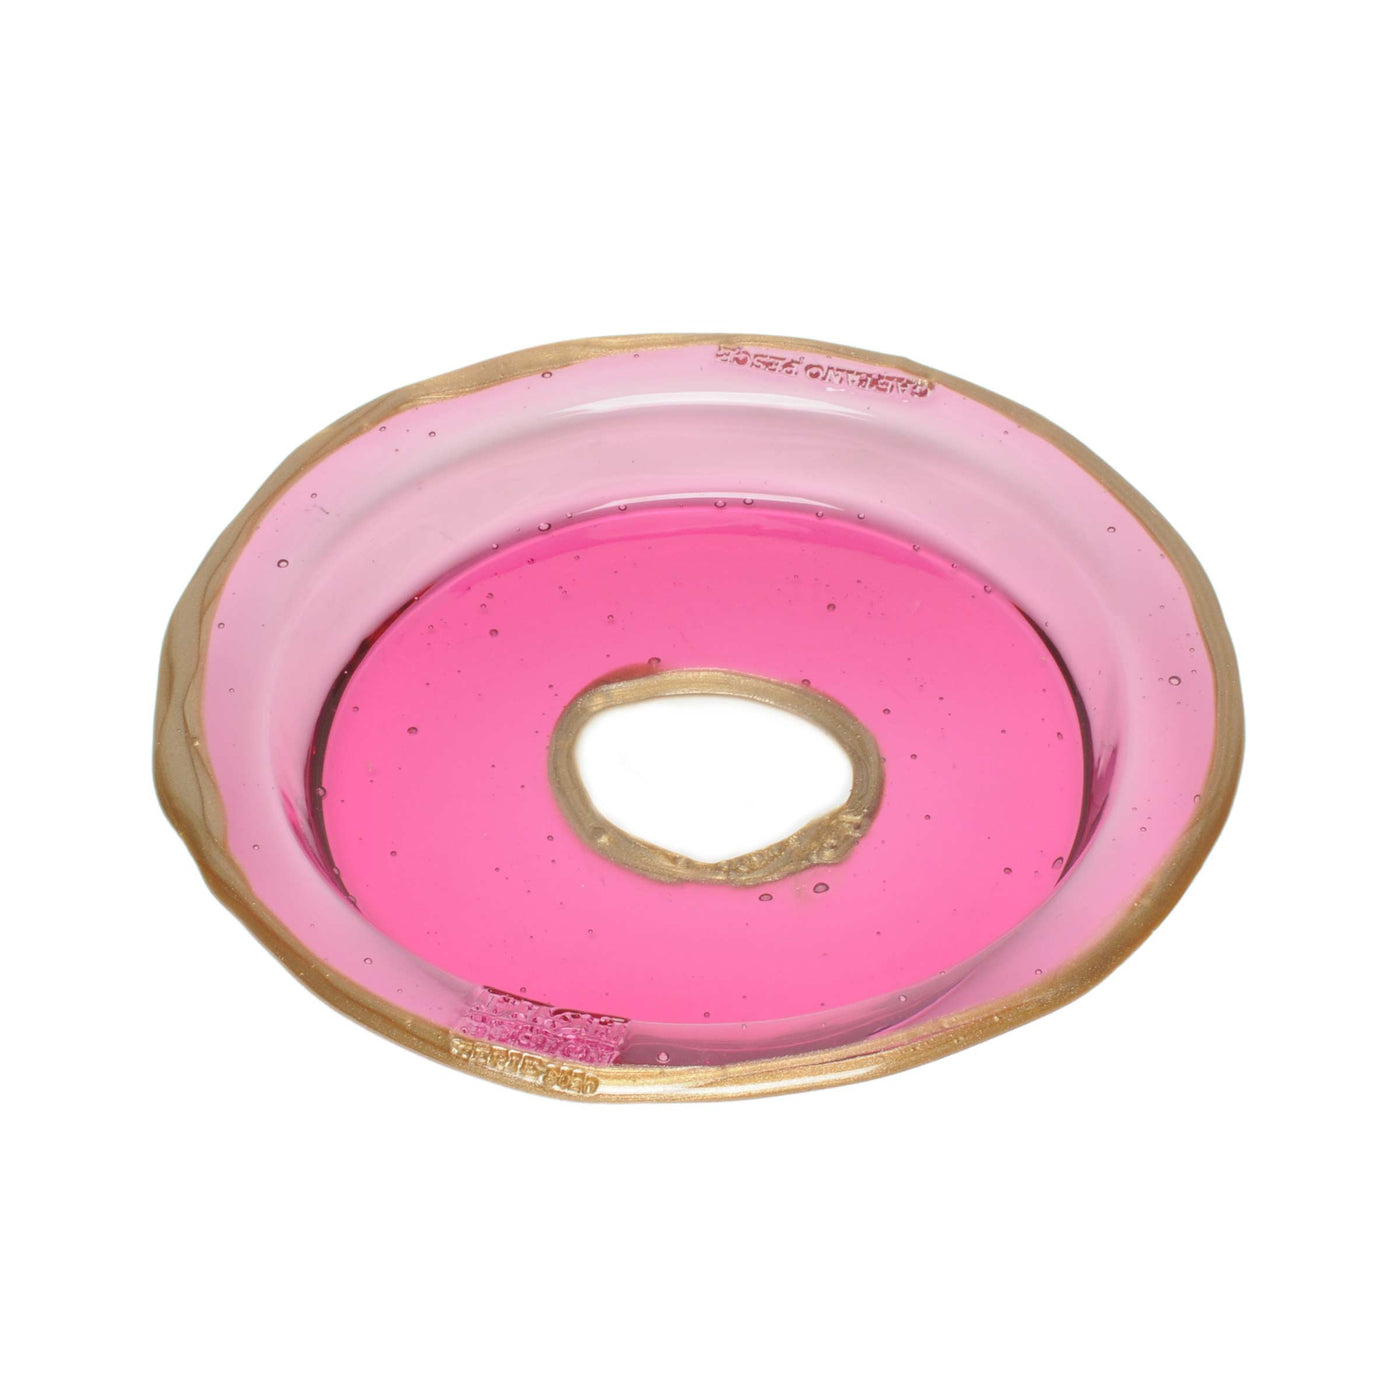 Resin Round Tray TRY-TRAY Pink by Gaetano Pesce for Fish Design 03